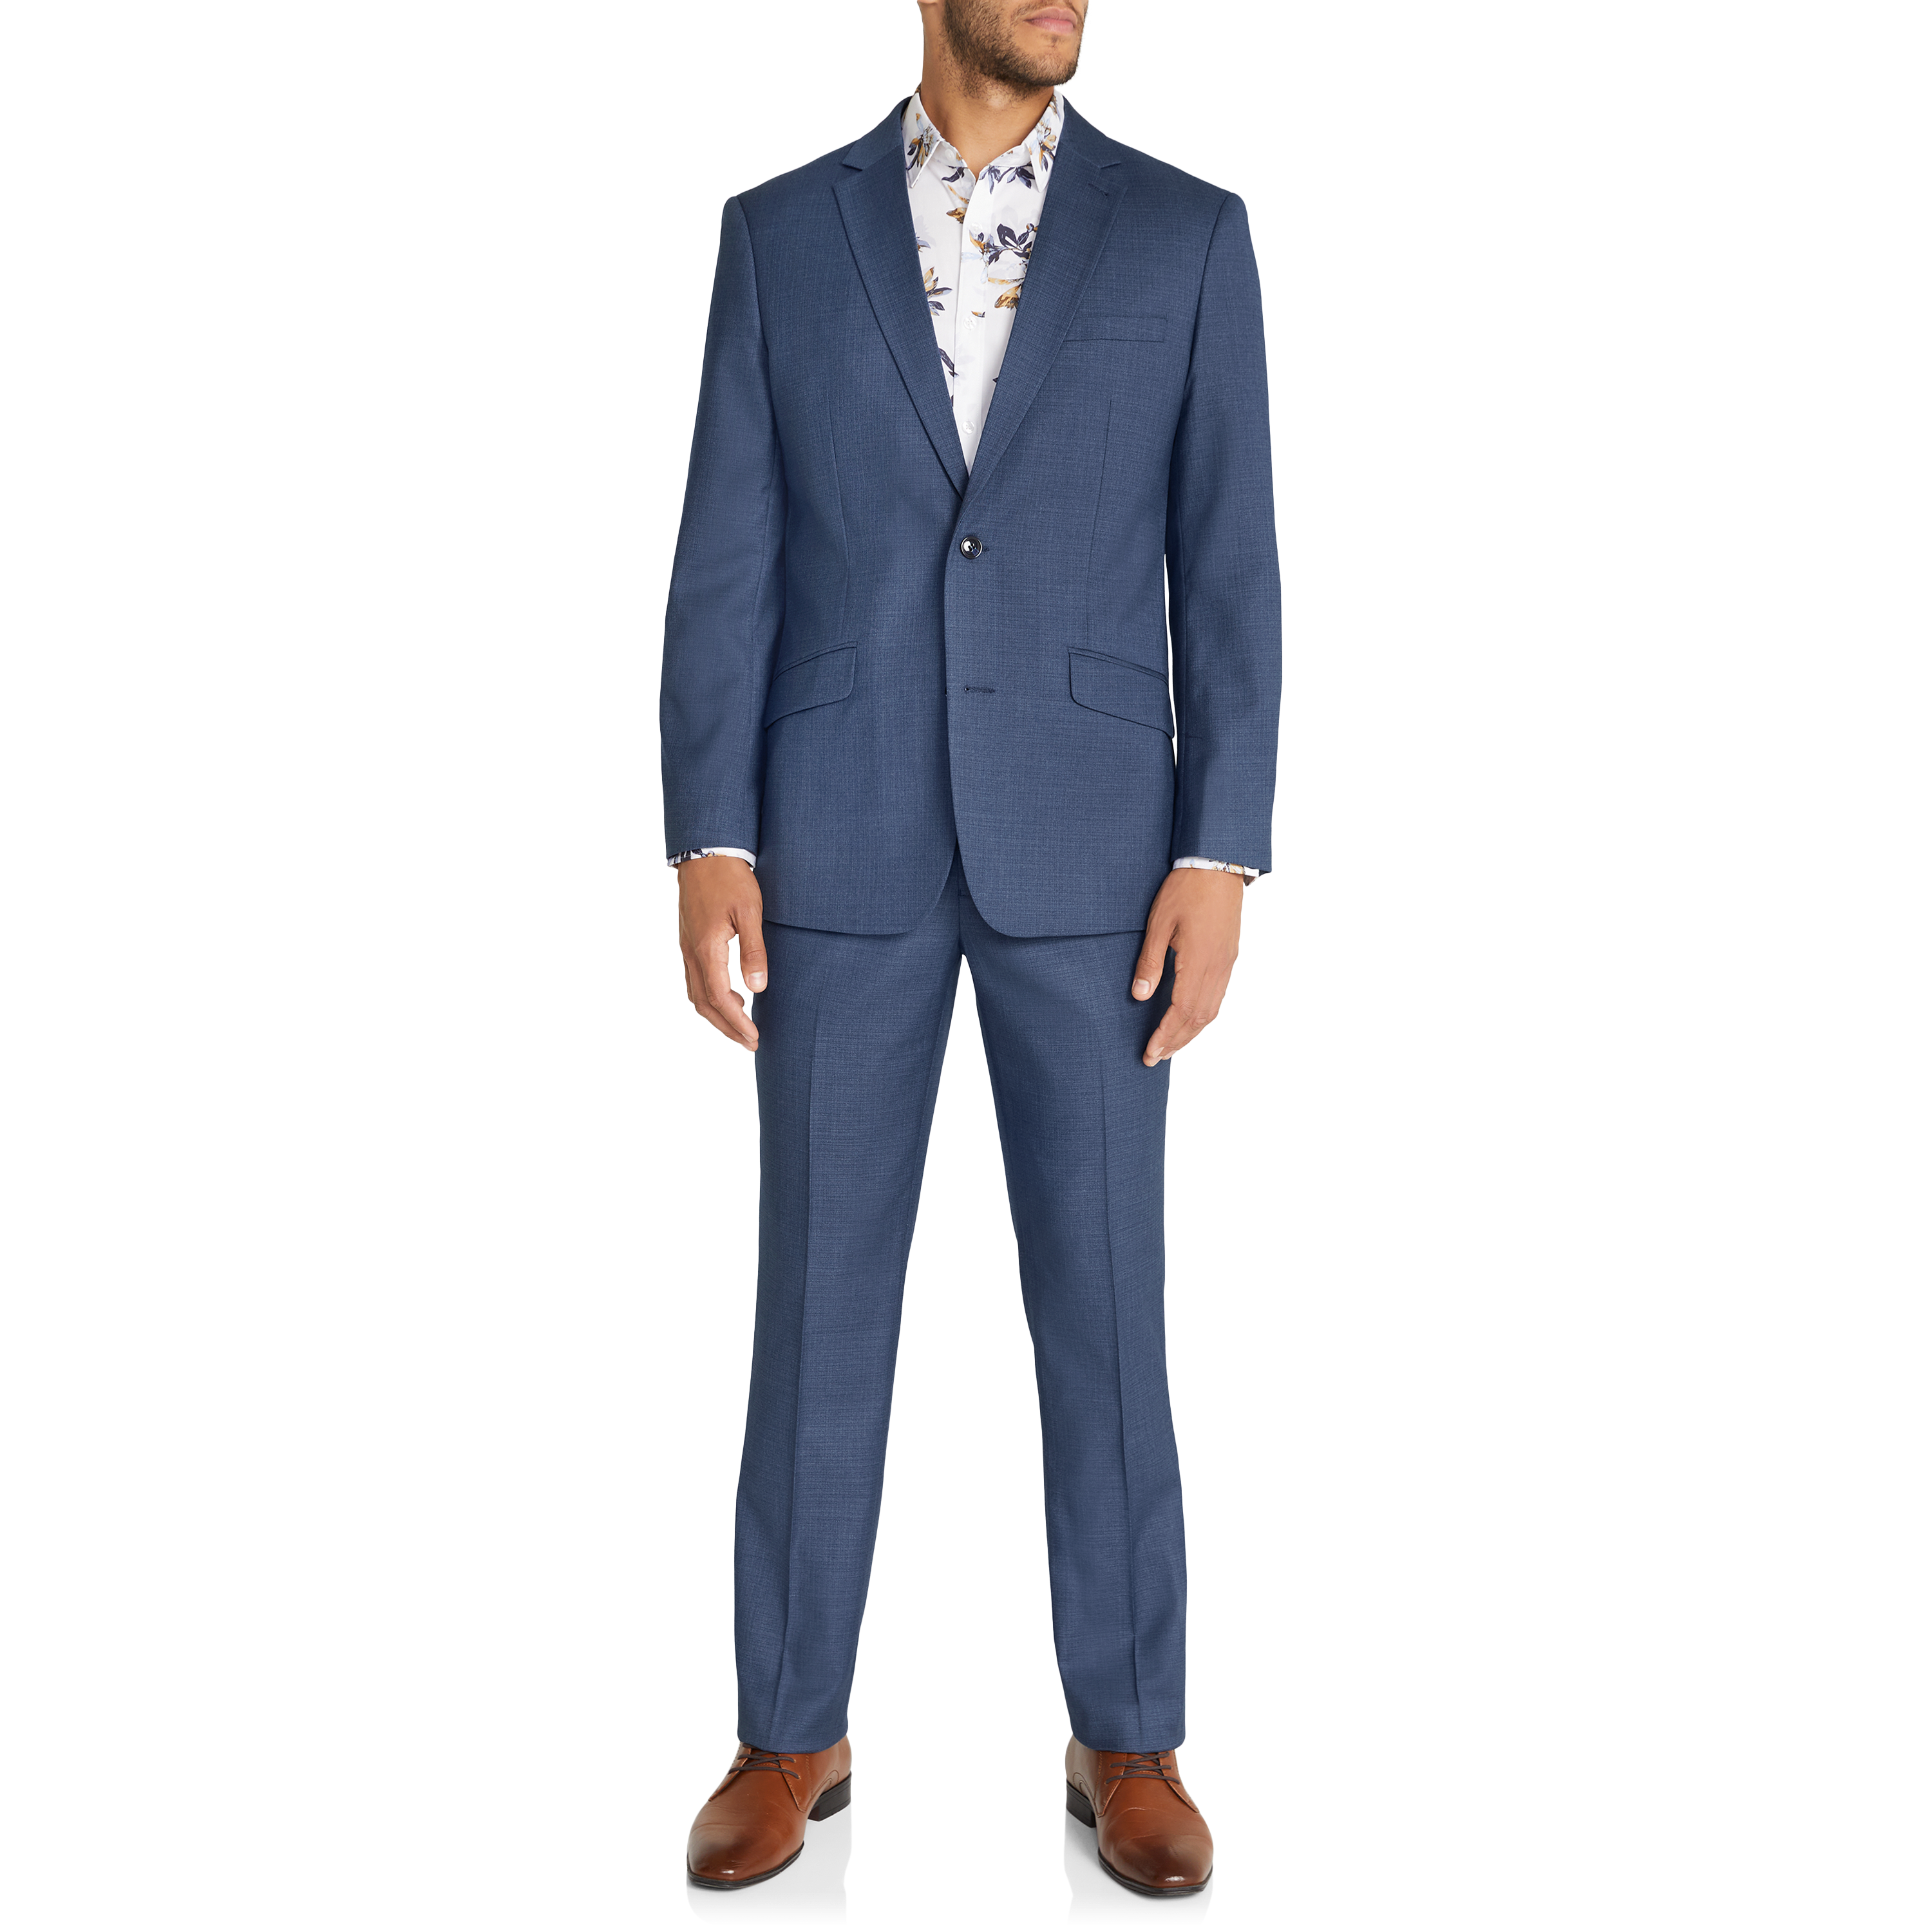 Light Blue Blazer with Navy Dress Pants Outfits For Men (45 ideas &  outfits) | Lookastic